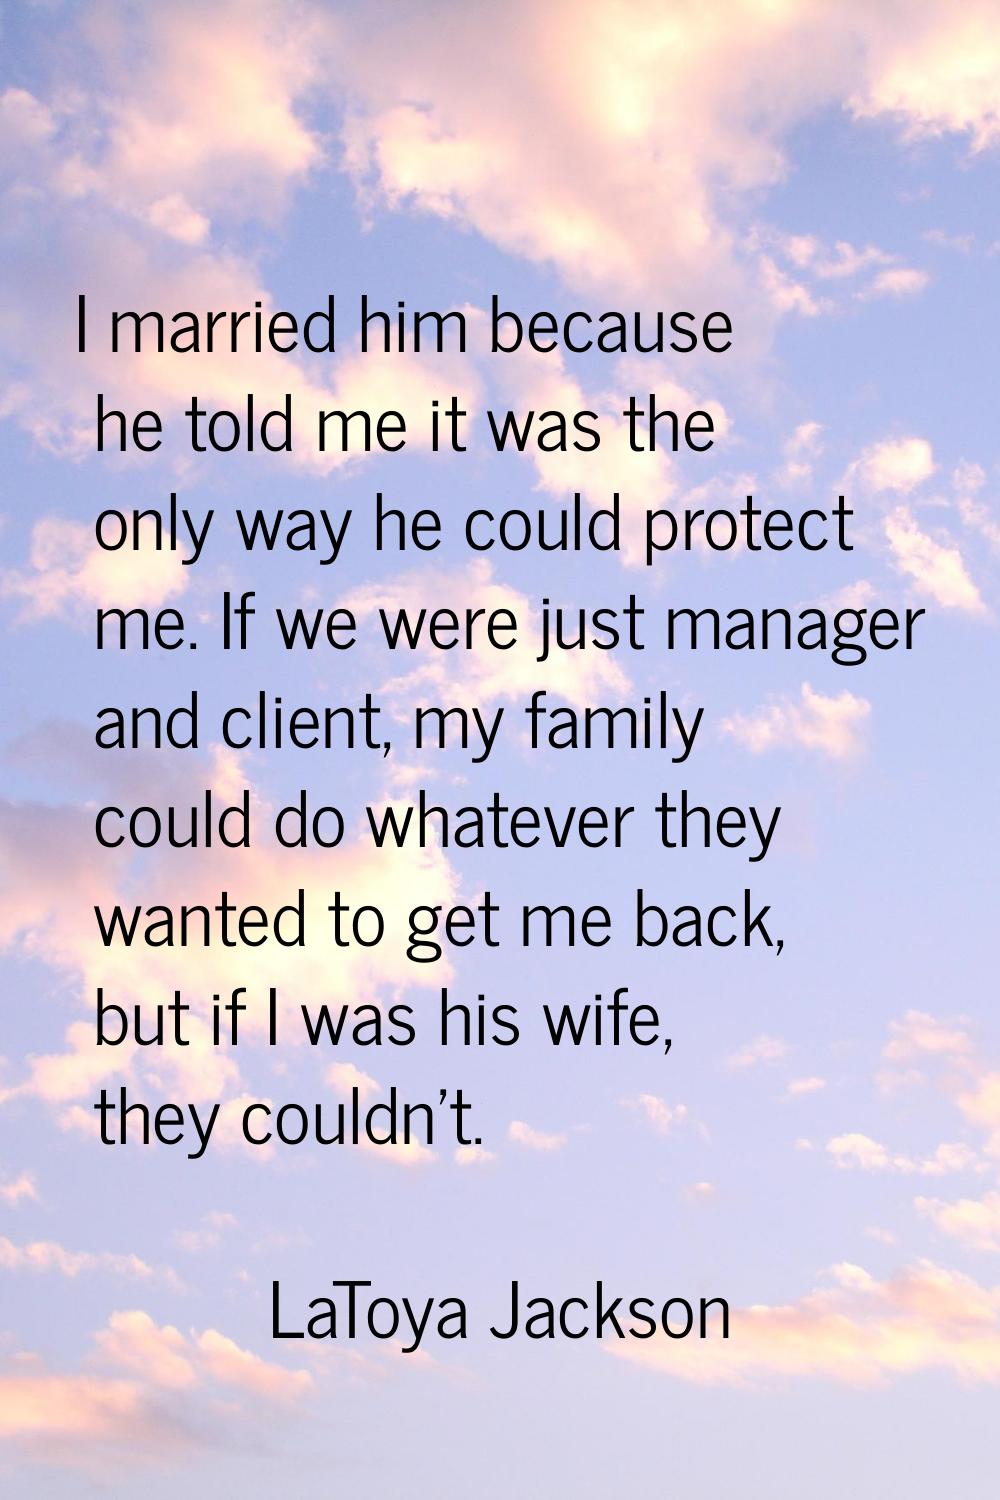 I married him because he told me it was the only way he could protect me. If we were just manager a